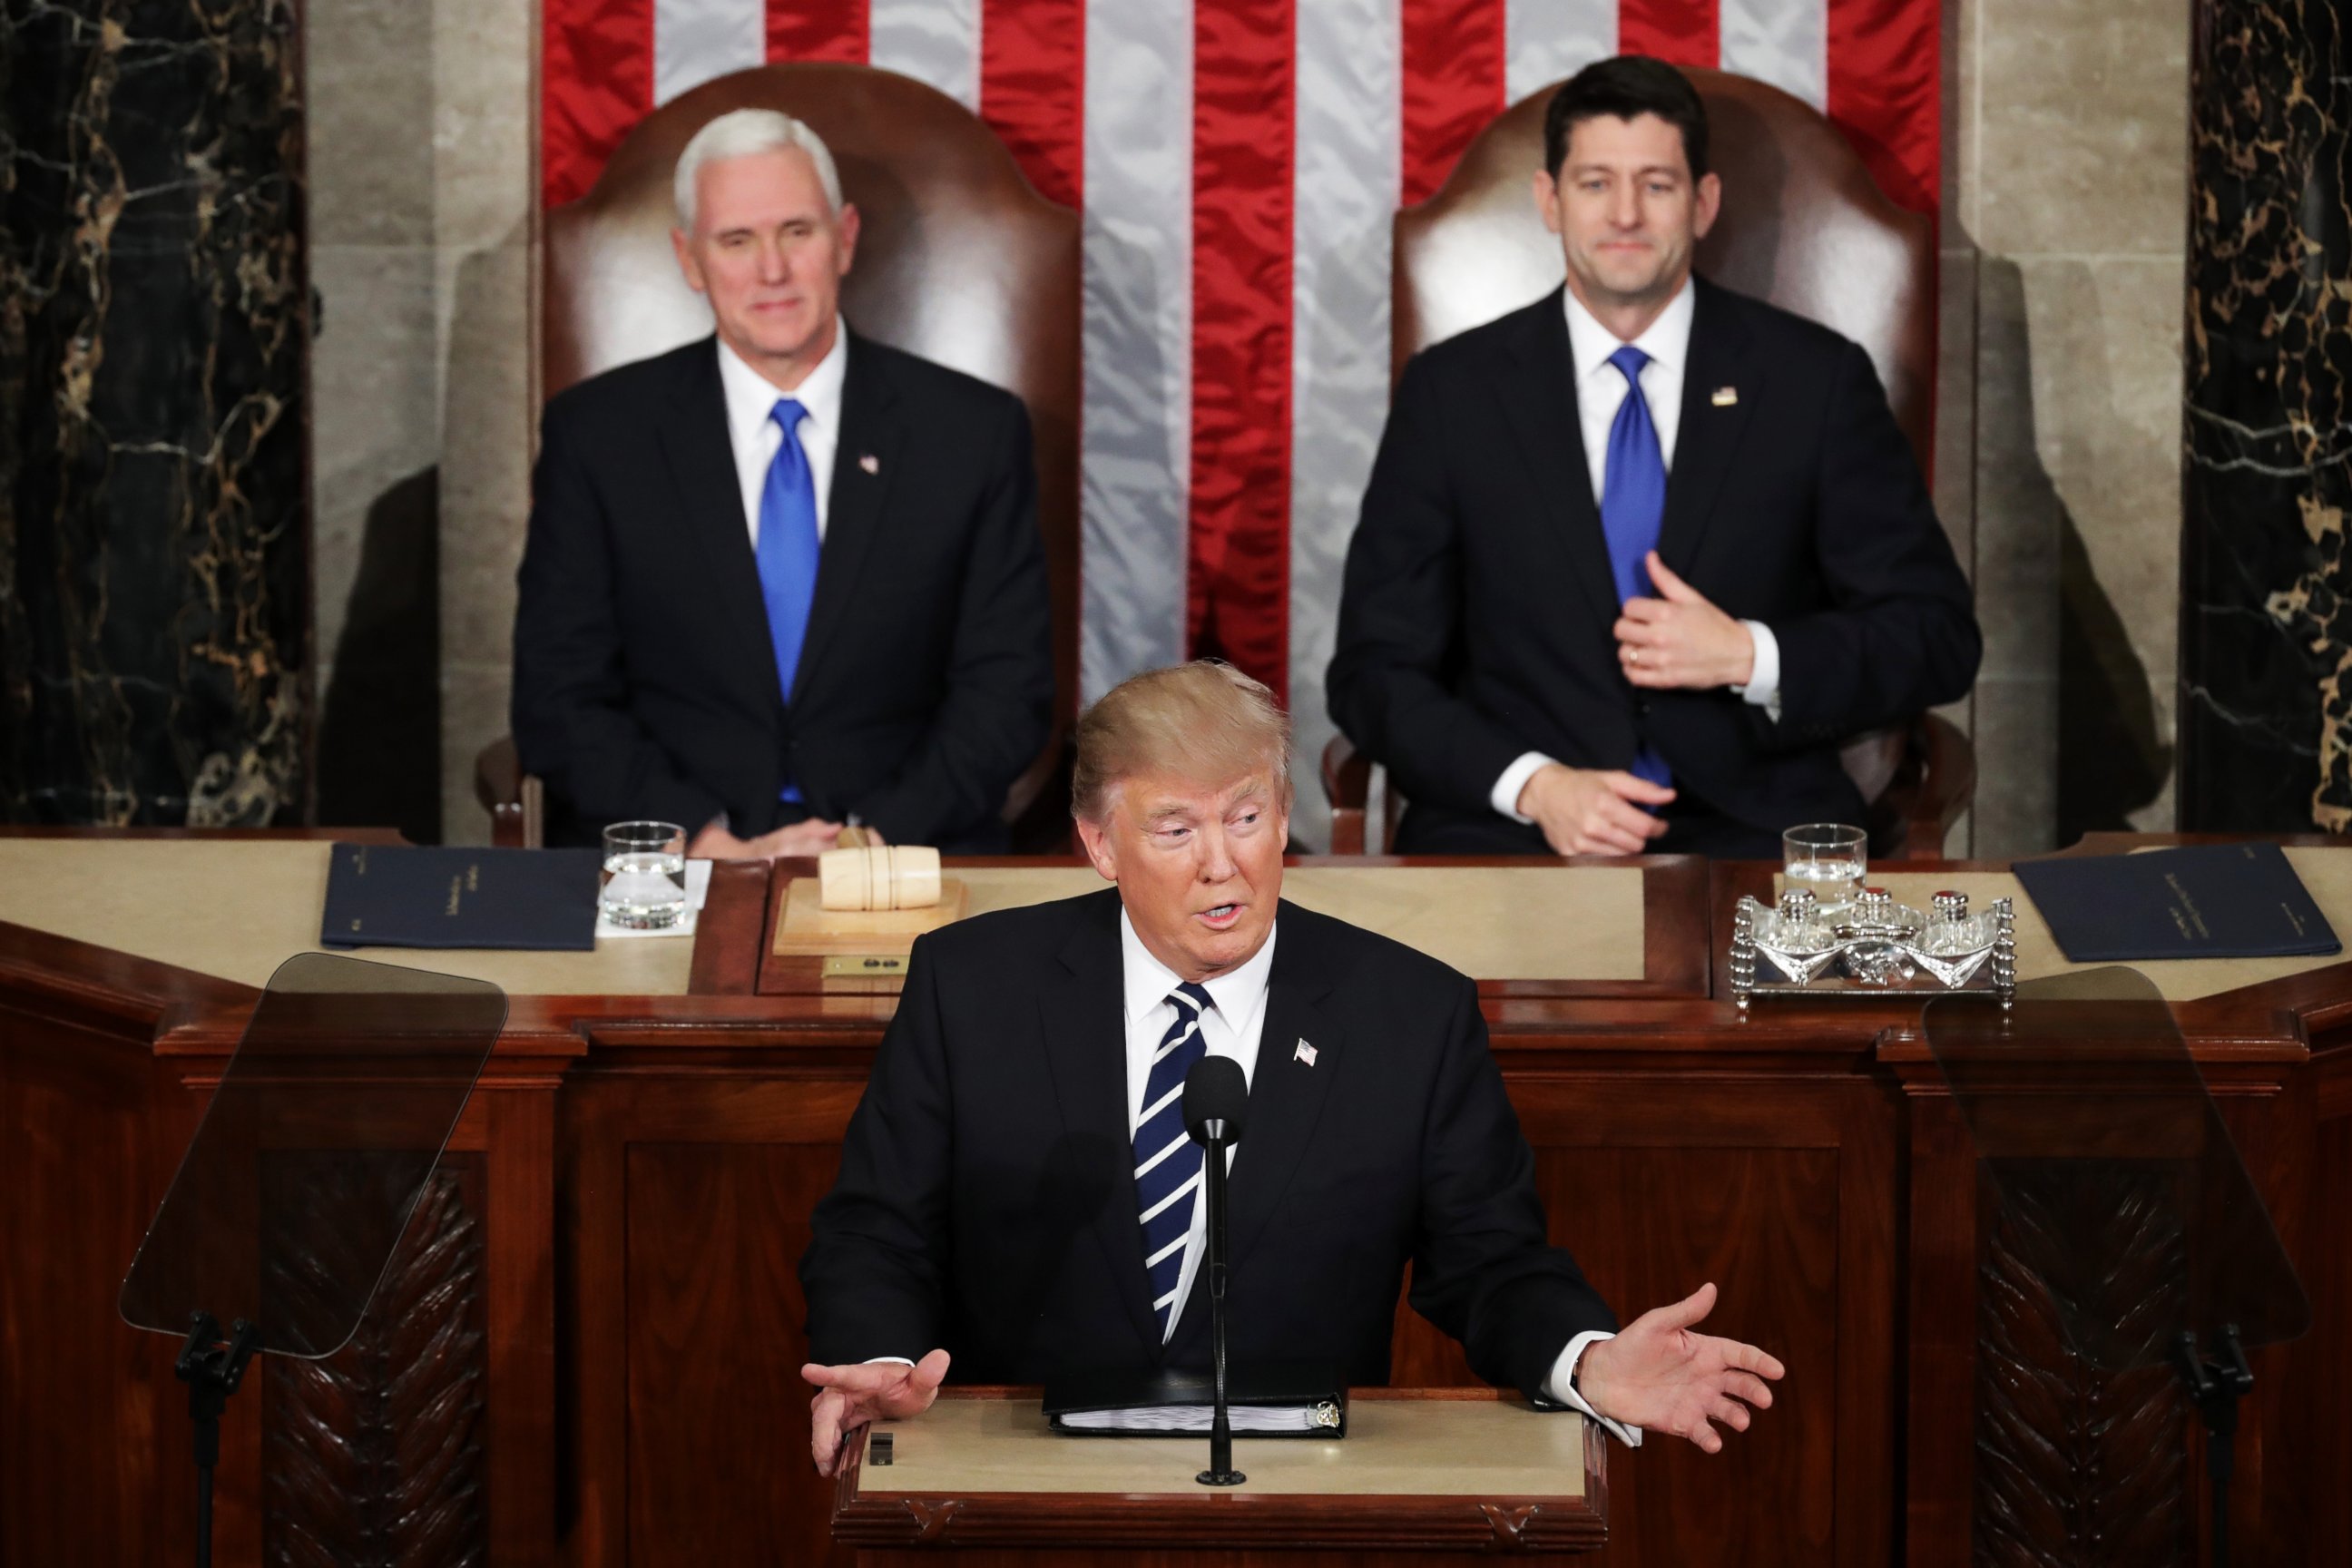 PHOTO: President Donald Trump addresses a joint session of the U.S. Congress as Vice President Mike Penceand House Speaker Rep. Paul Ryan look on on Feb. 28, 2017 in Washington, DC.